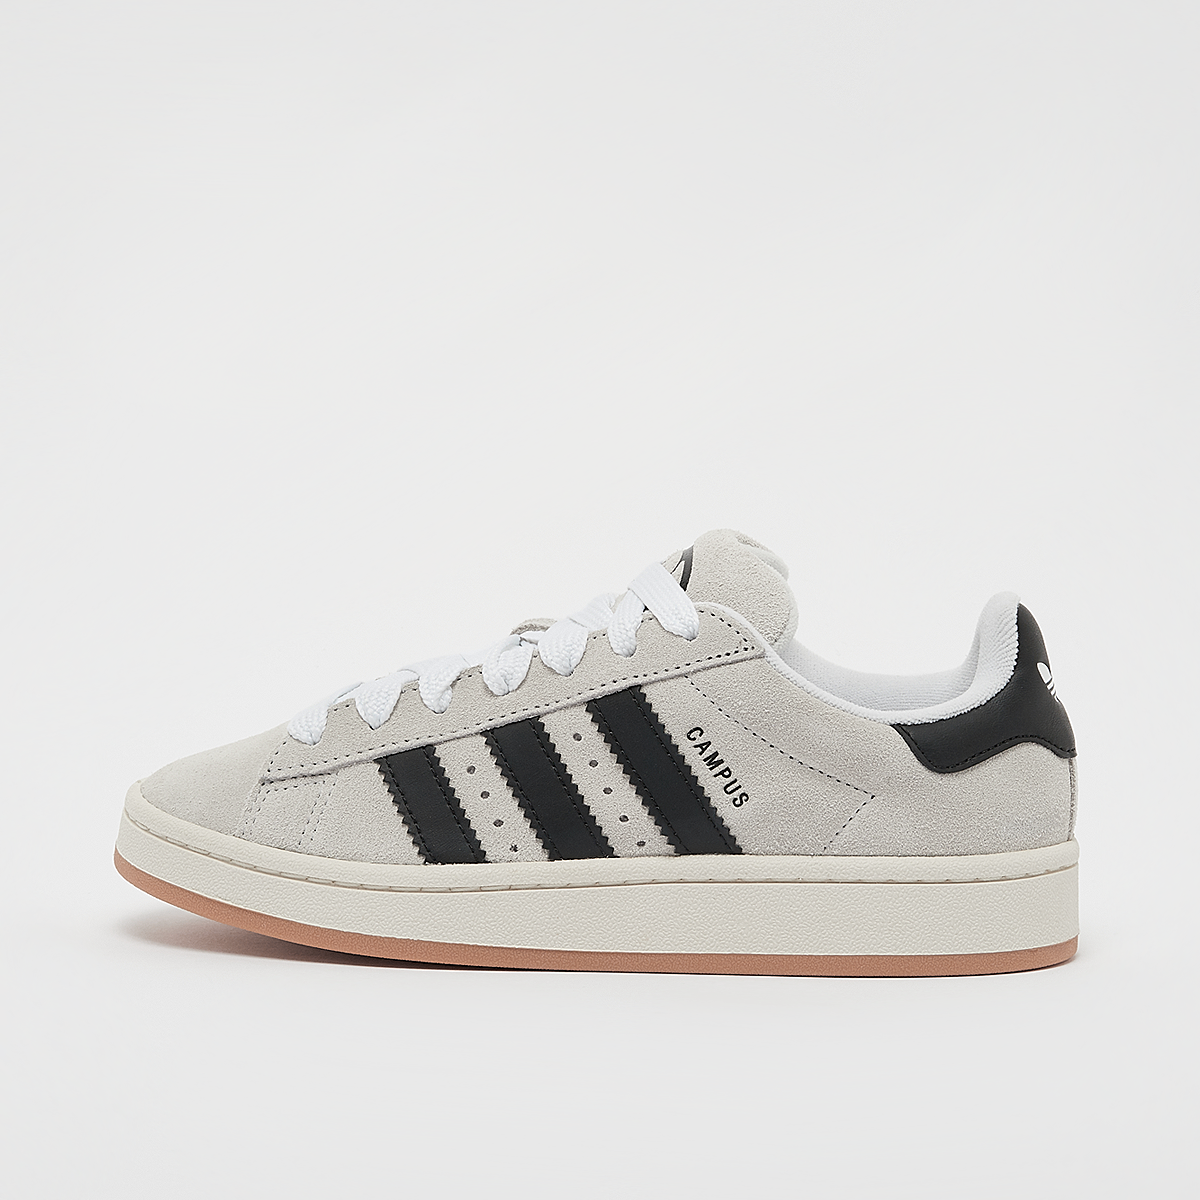 Sneaker Campus 00s W, adidas Originals, Footwear, crystal white/core black/off white, taille: 37 1/3